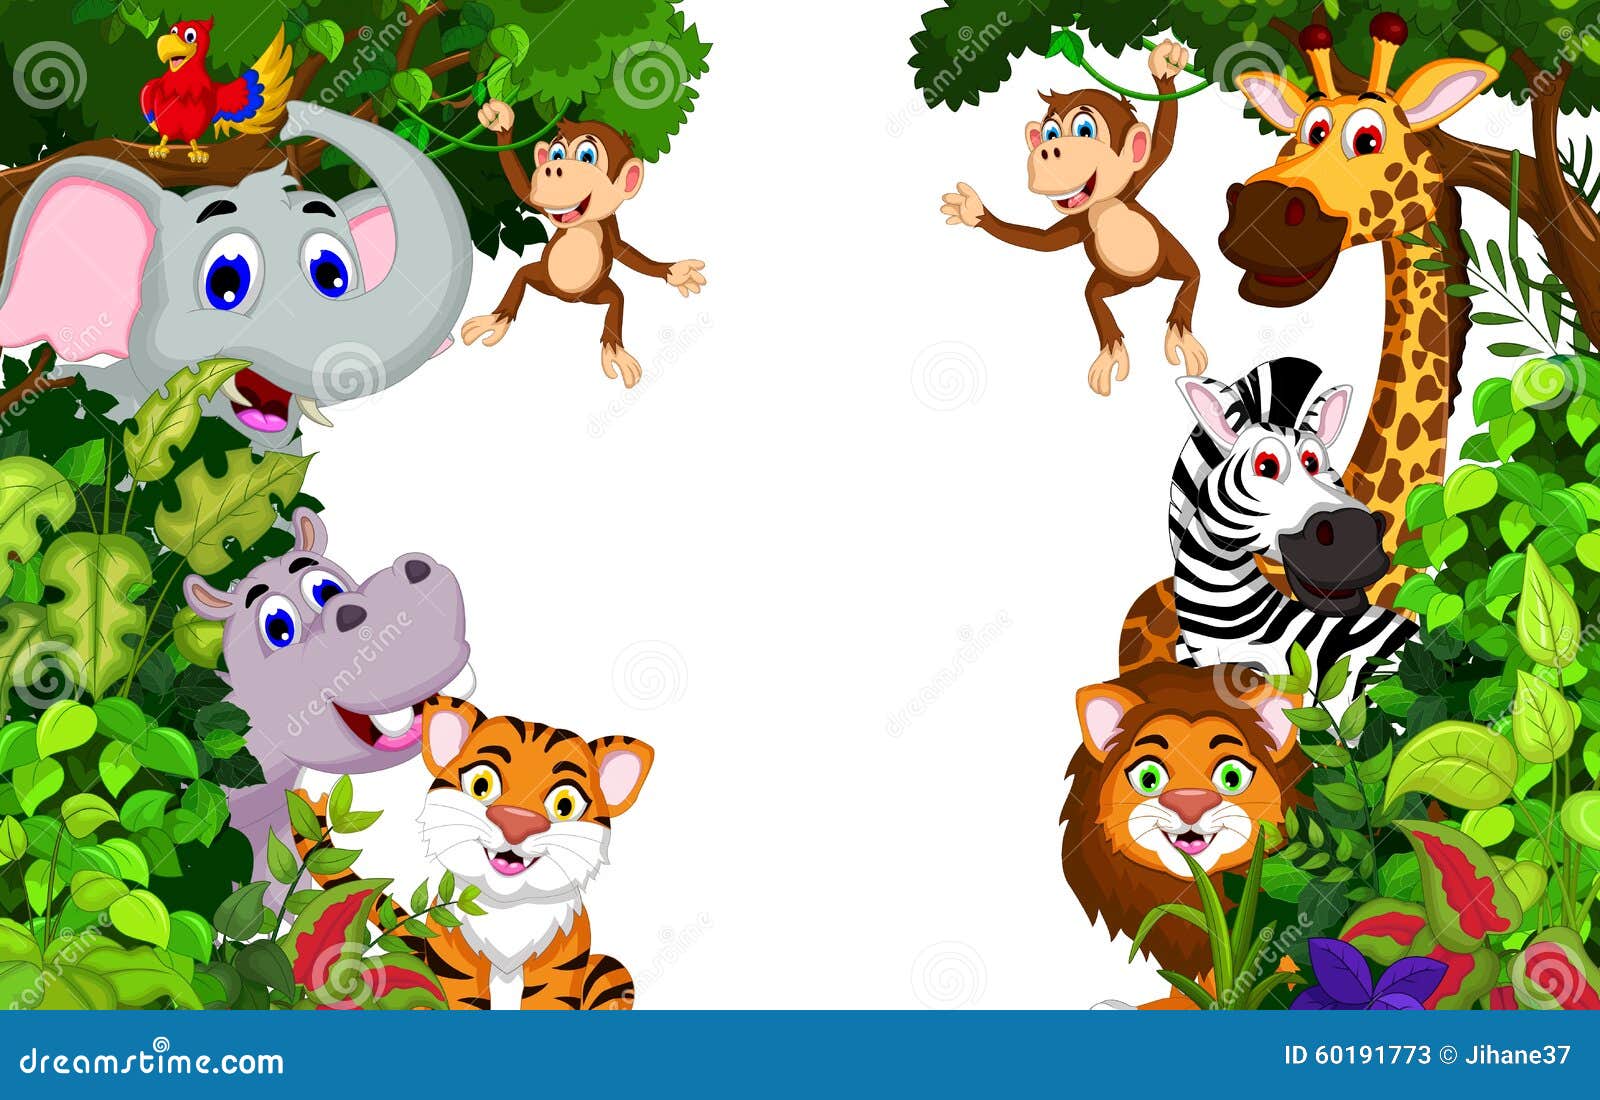 Funny Animal Cartoon with Forest Background Stock Illustration -  Illustration of baboon, rhino: 60191773